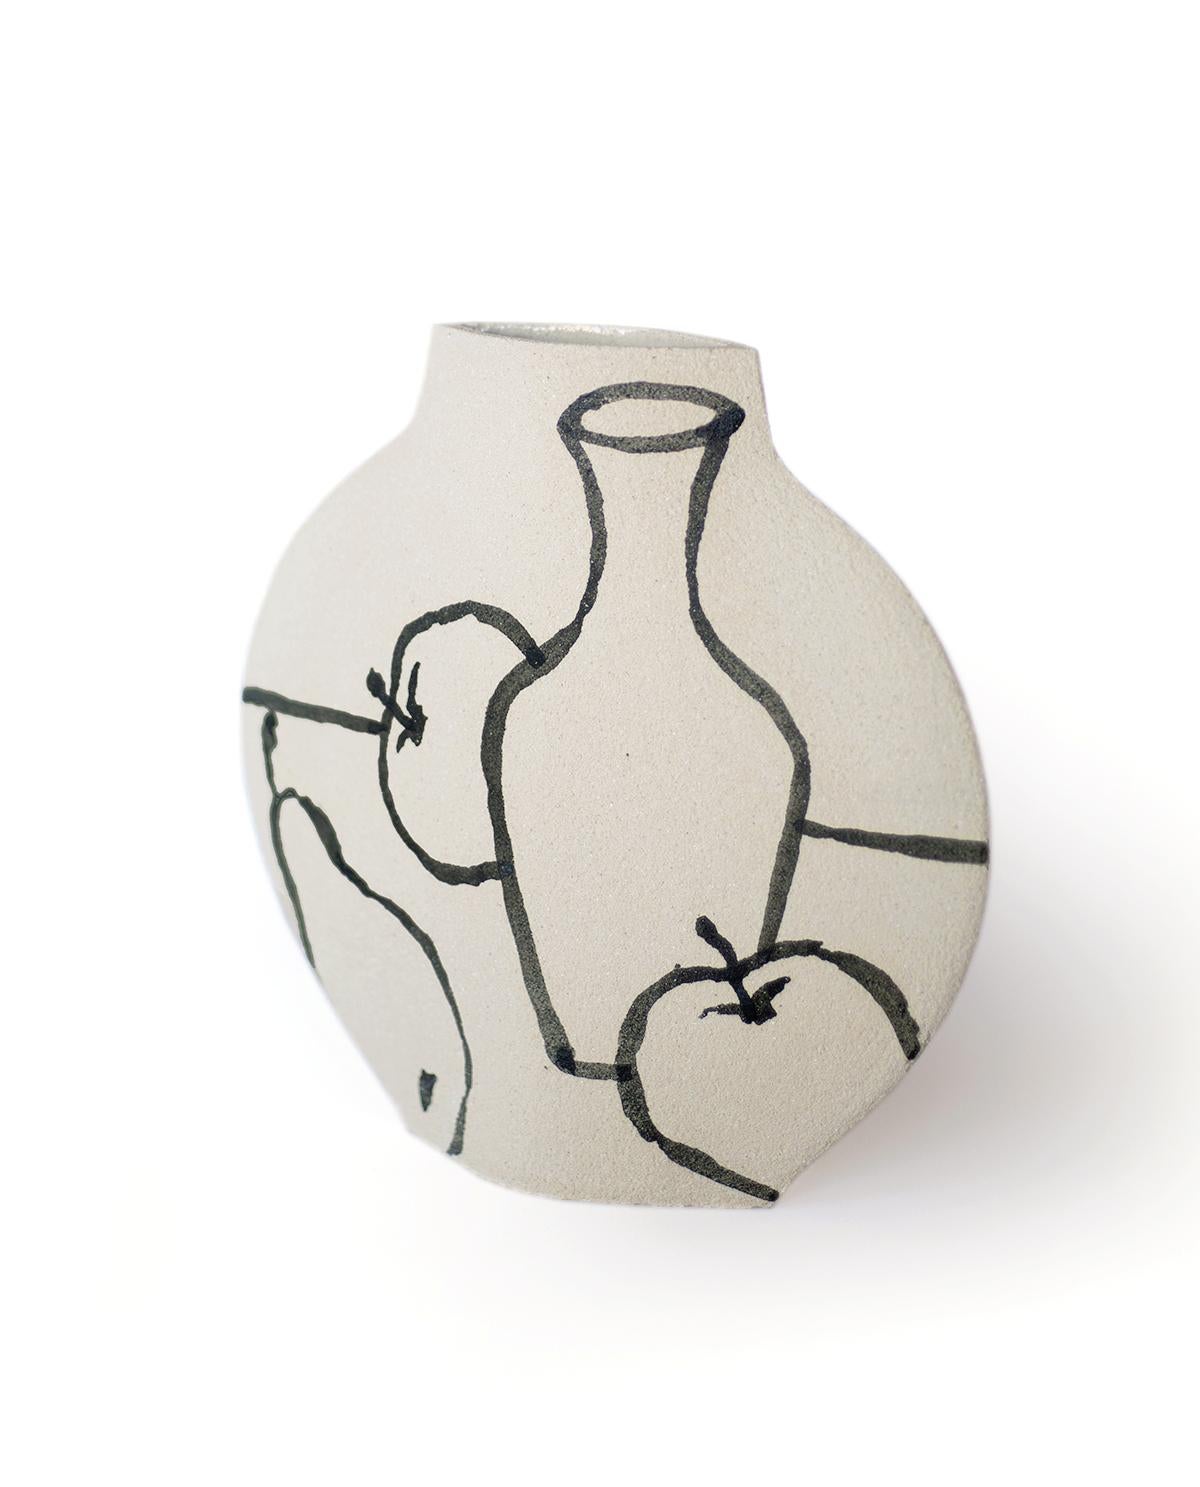 'Still Life’ handmade white ceramic vase

This vase is part of a new series inspired by iconic Art (and more precisely paintings) movements. Here is our Lune [M] model with motifs based on still life paintings. They are hand painted on the vase